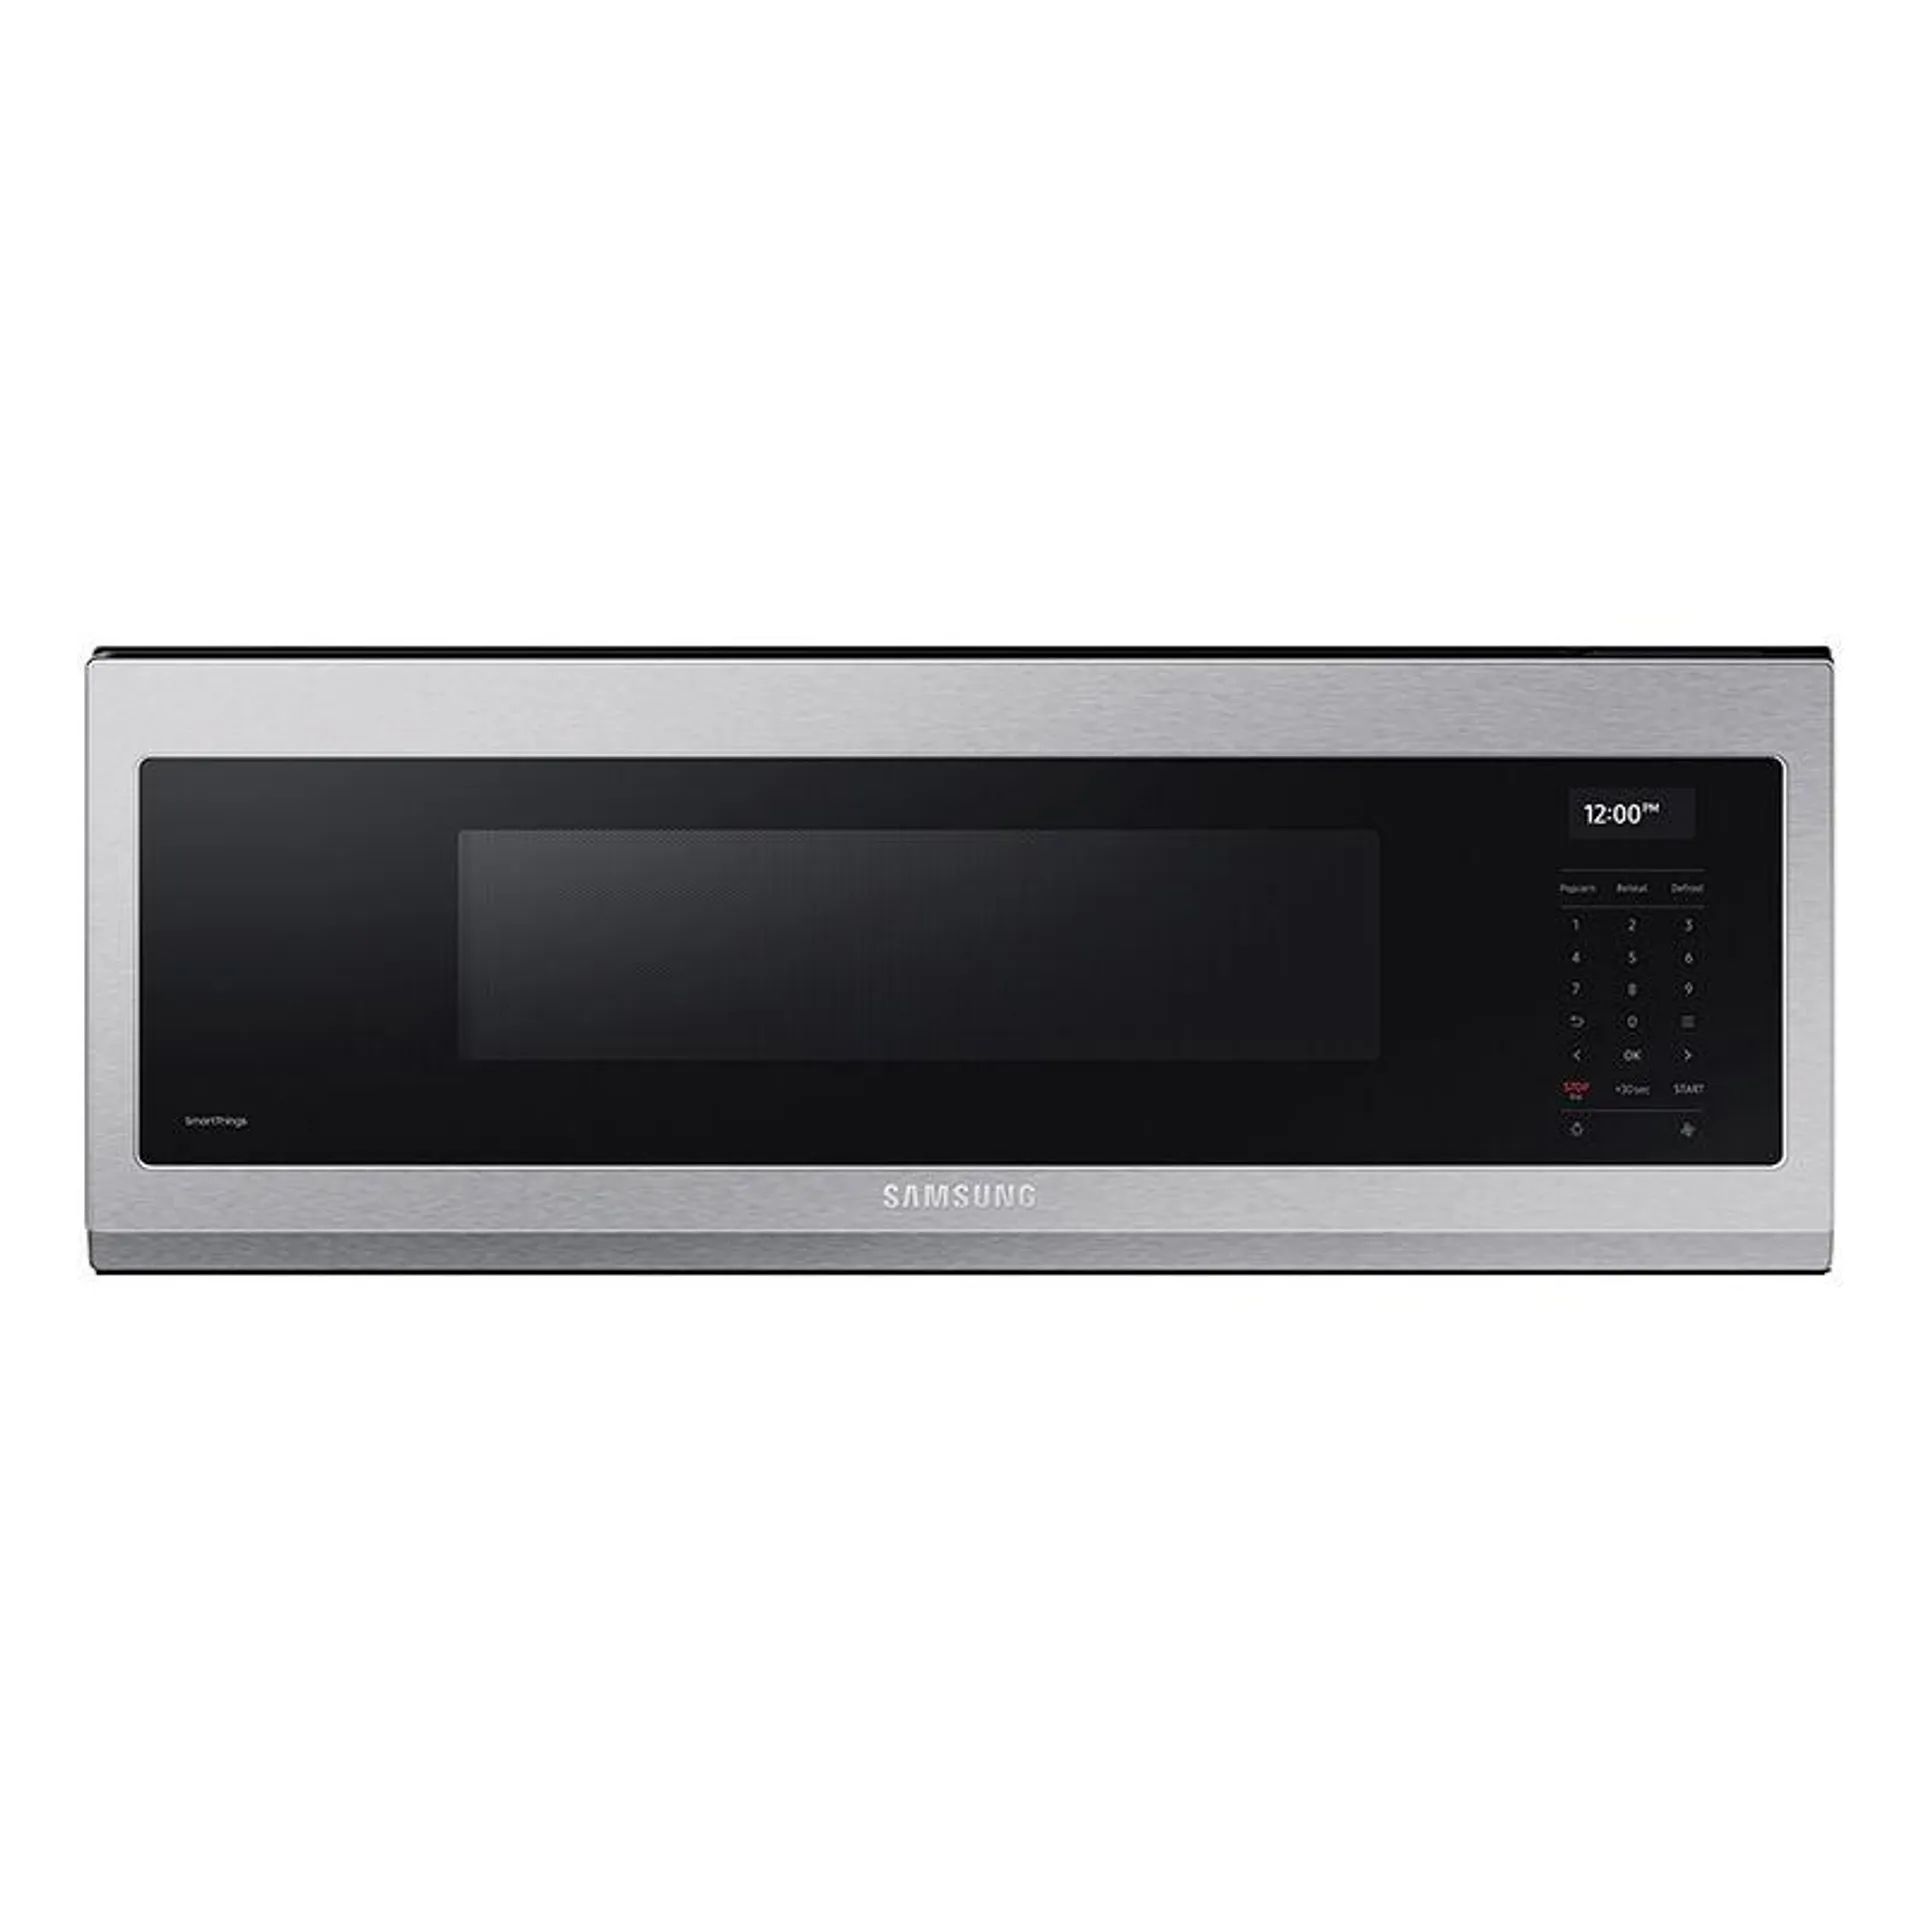 Samsung 30" 1.1 Cu. Ft. Over-the-Range Microwave with 10 Power Levels, 550 CFM & Sensor Cooking Controls - Stainless Steel